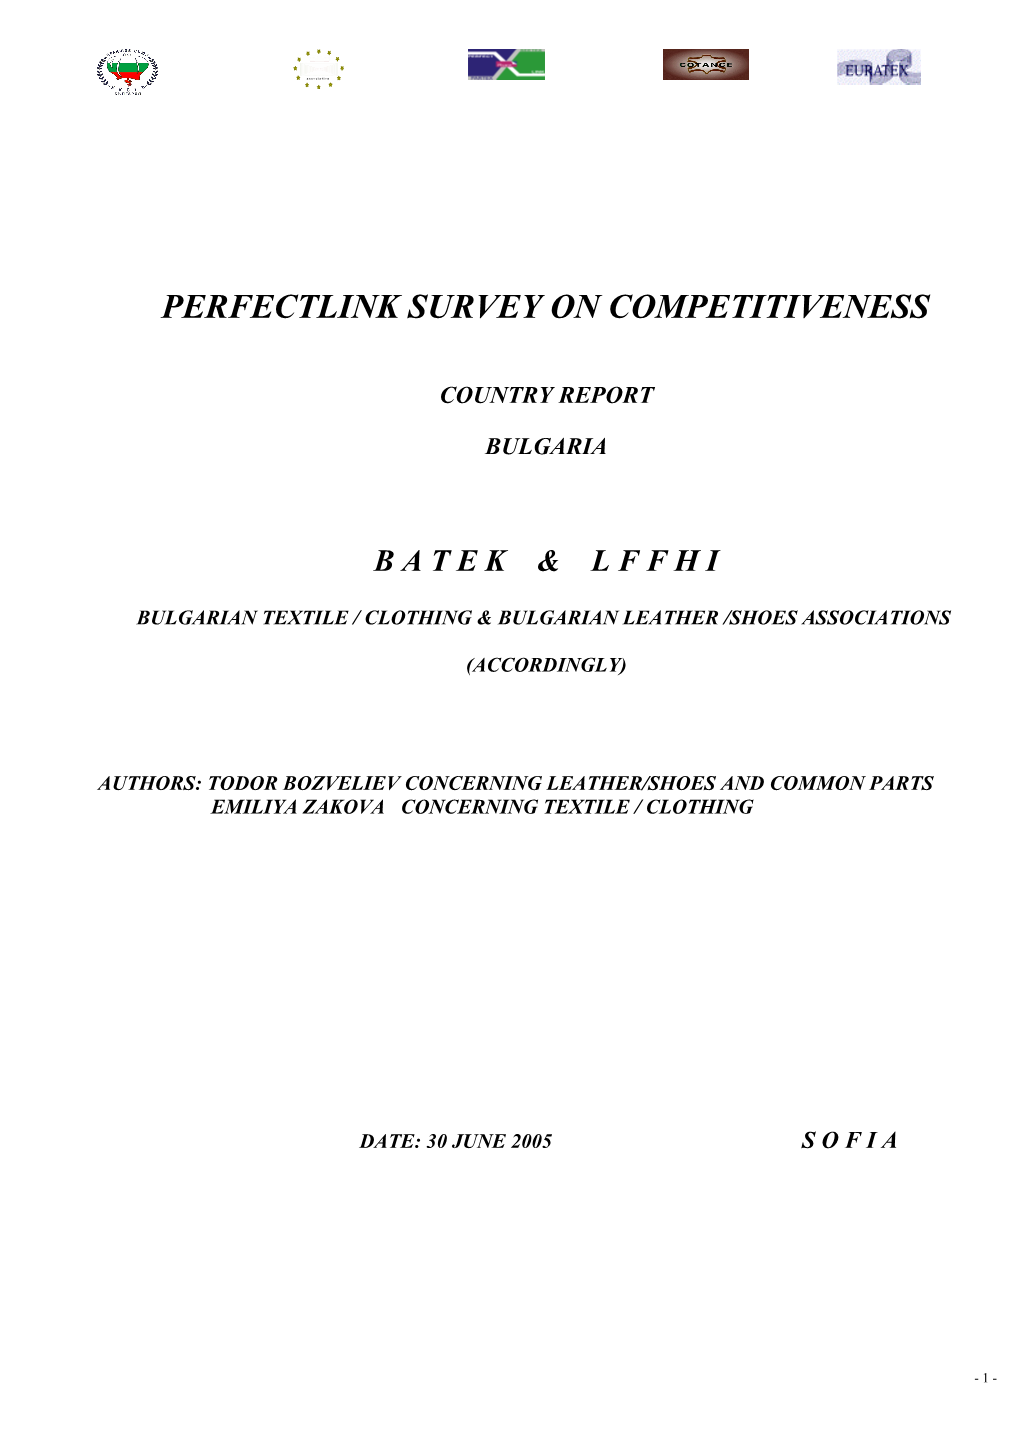 National Report on Perfectlimk Survey on Competitveness